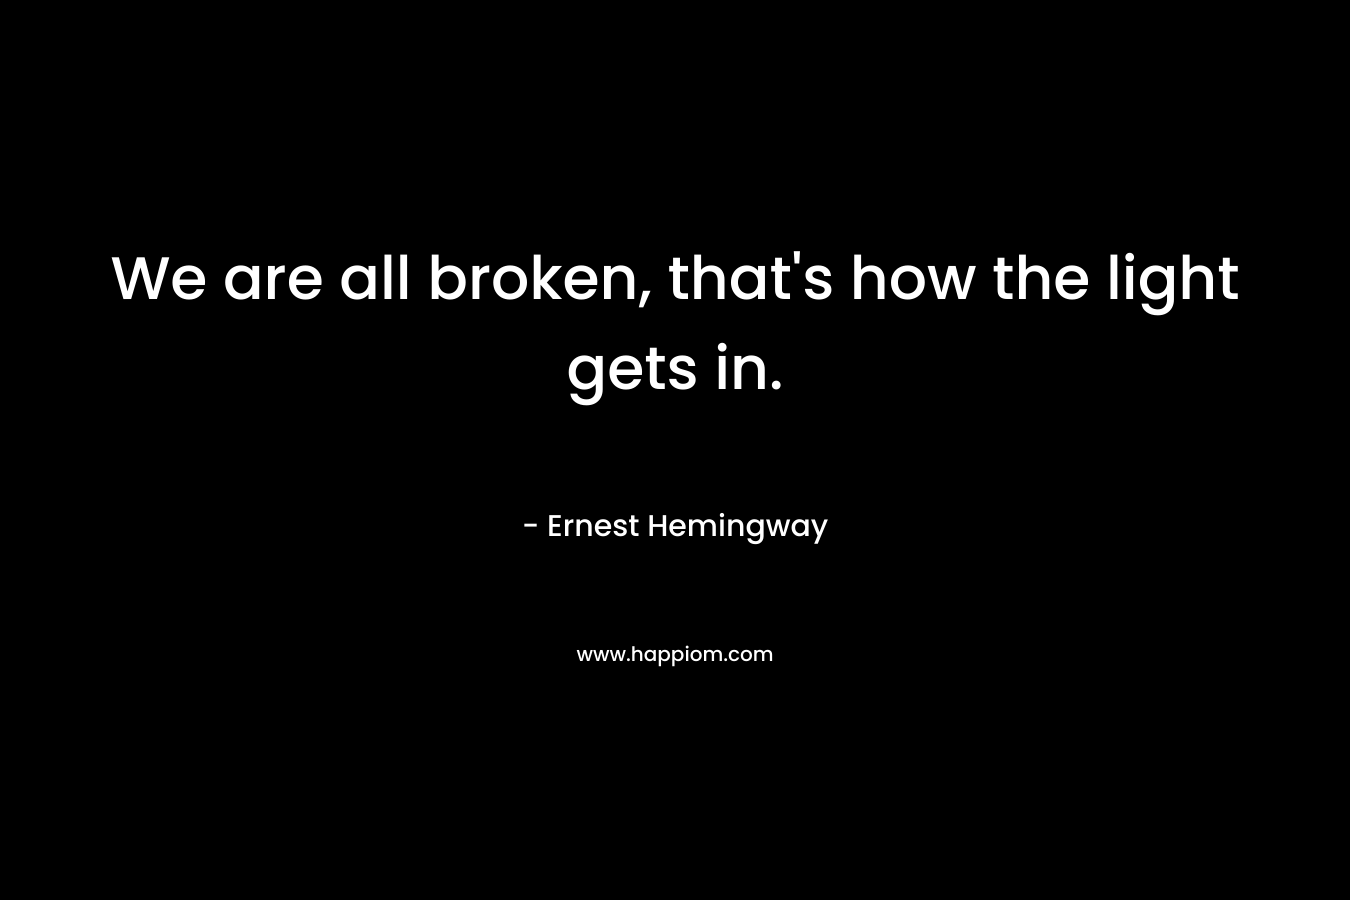 We are all broken, that’s how the light gets in. – Ernest Hemingway